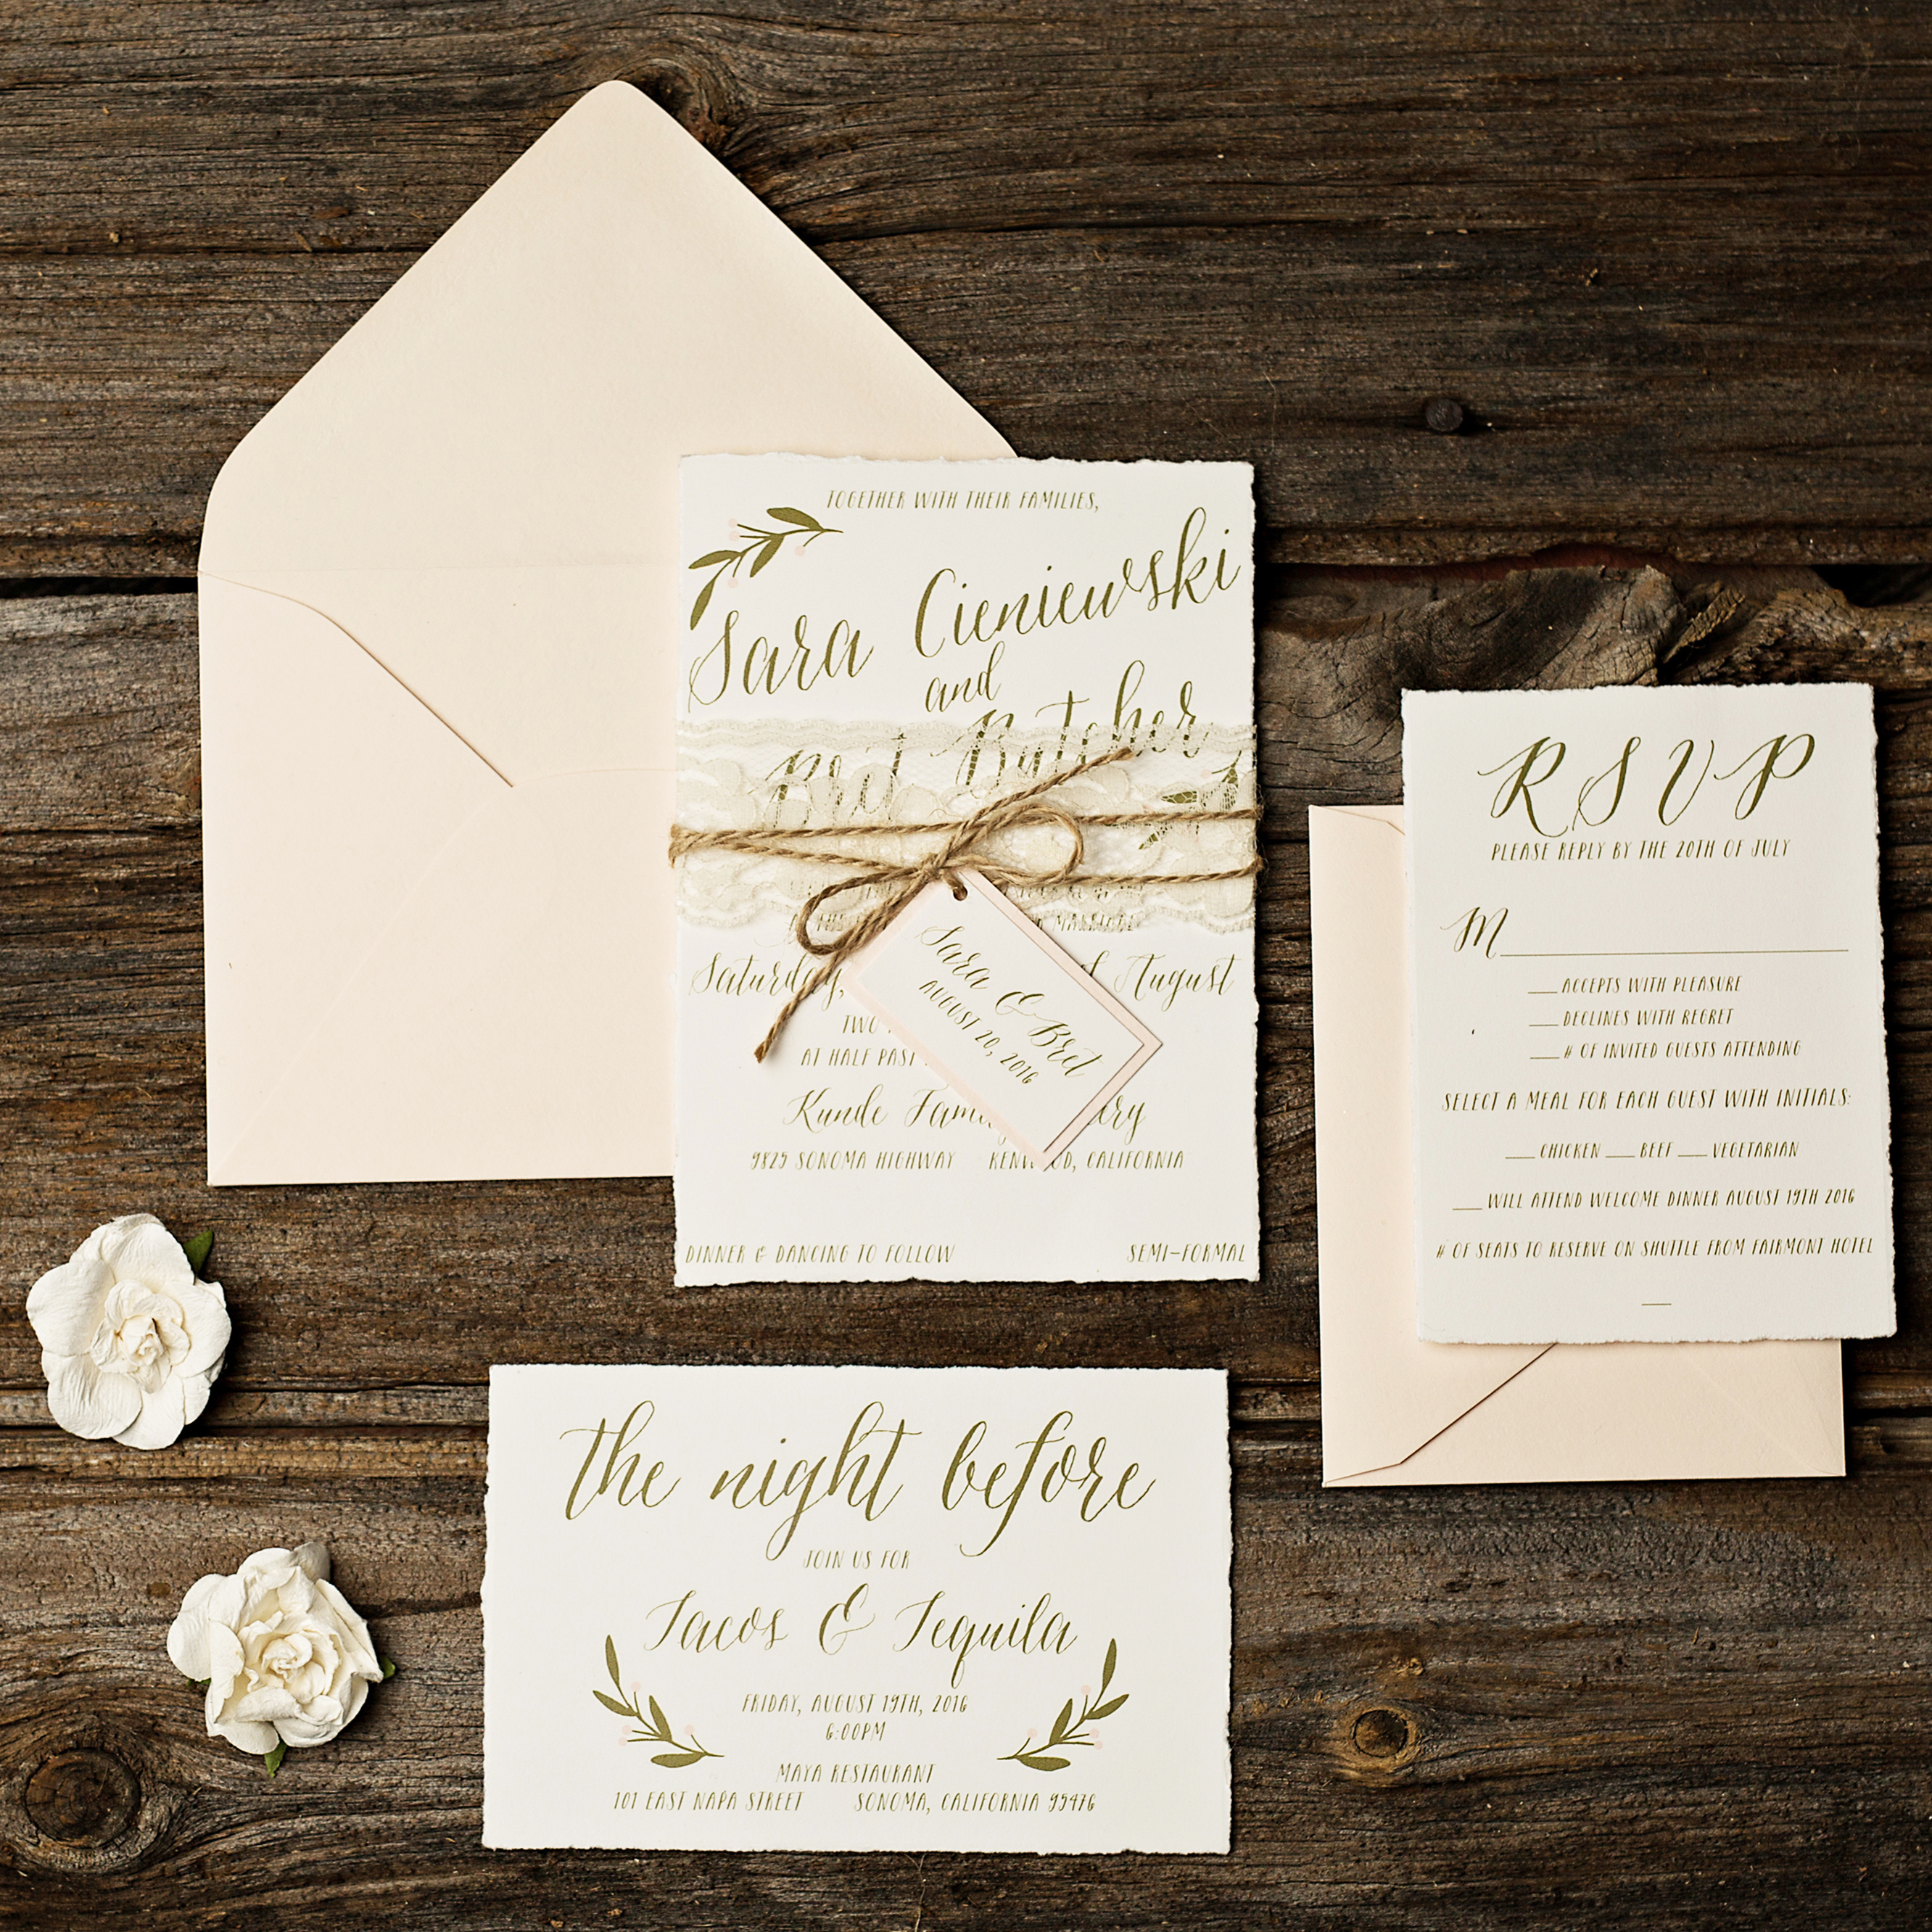 Country Chic Wedding Invitations Rustic Chic Wedding Invitations Archives Too Chic Little Shab